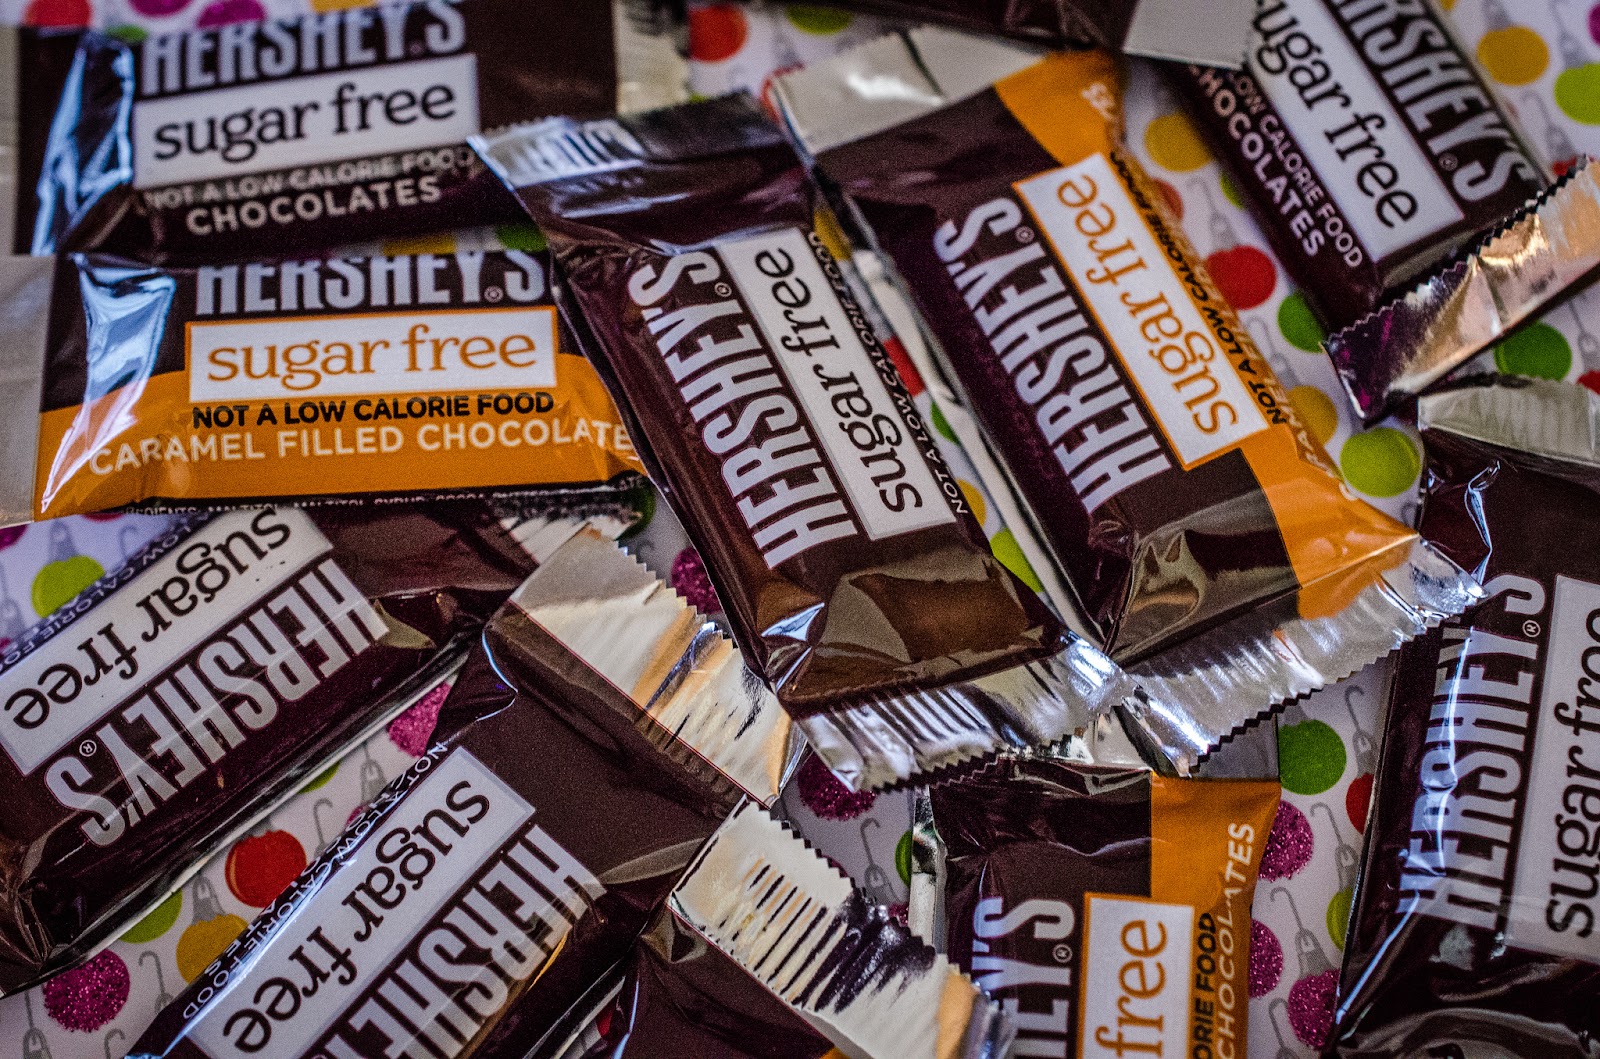 photo showing a pile of many bars of sugar-free Hershey's chocolate